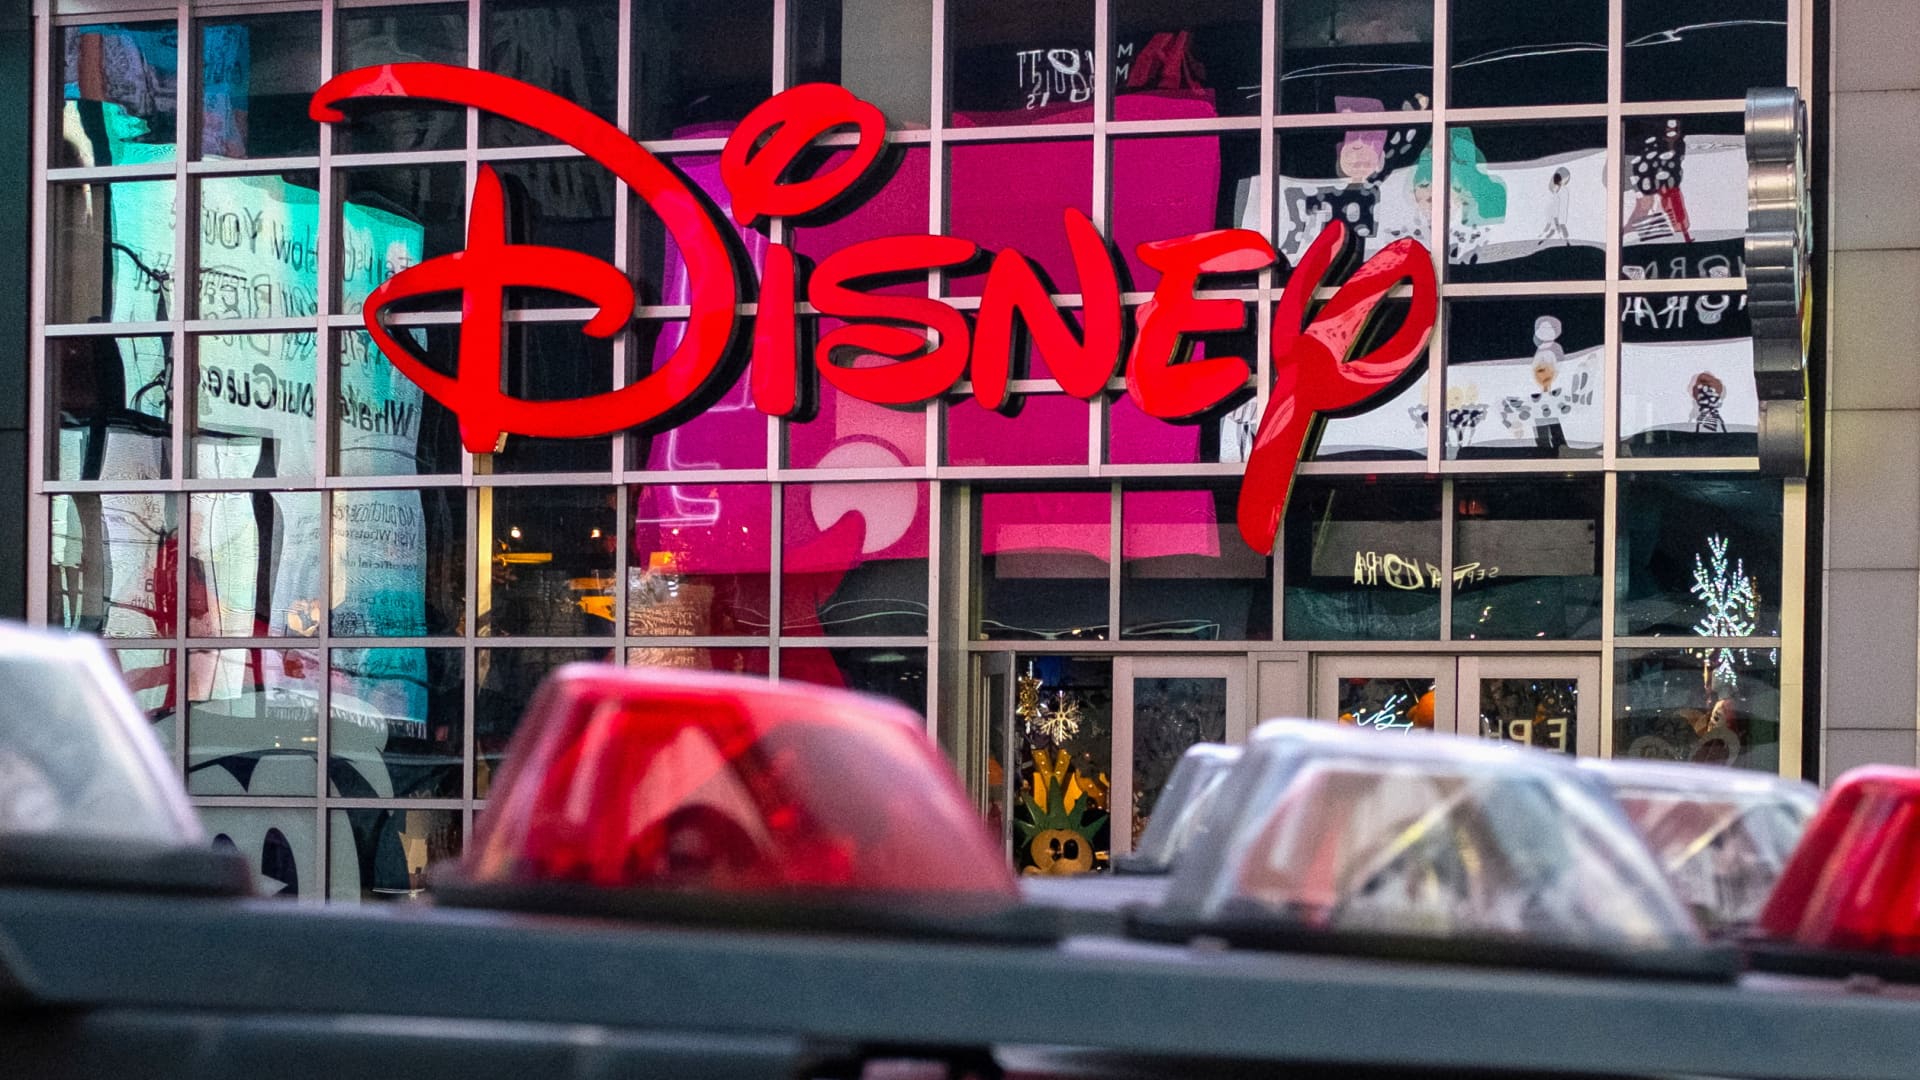 Disney tells employees it will provide ‘comprehensive access’ for reproductive care